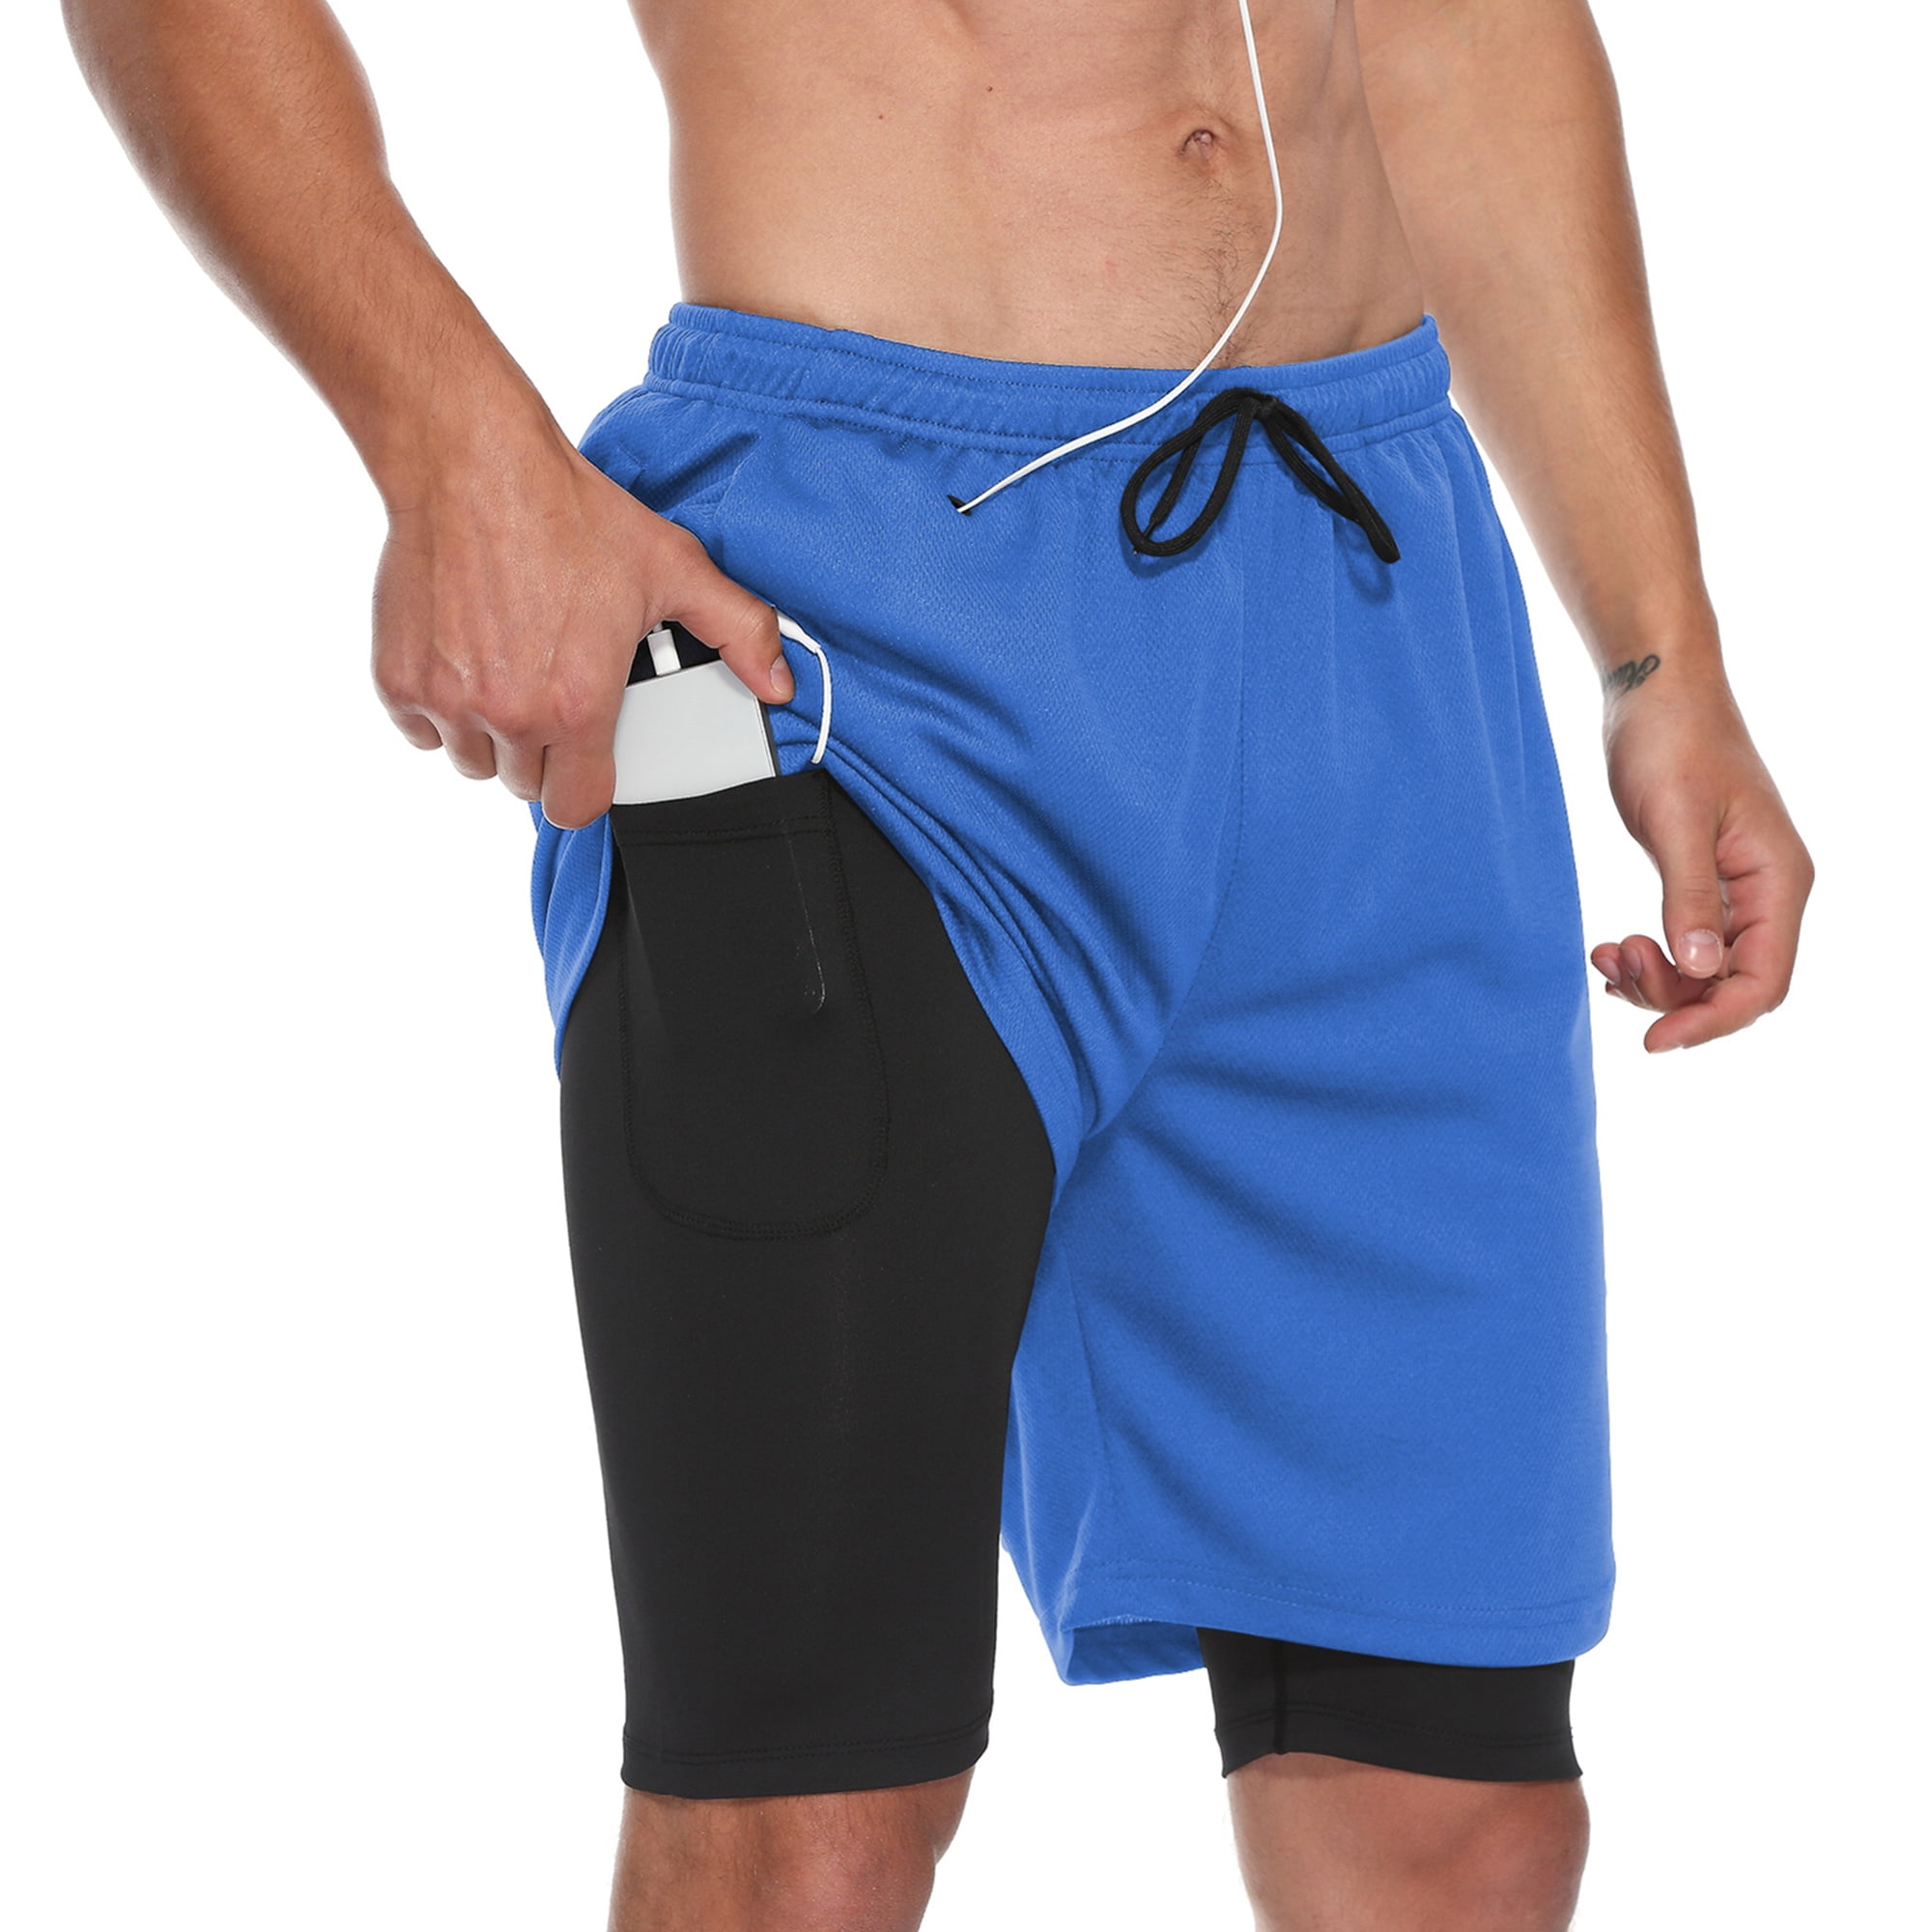 FEDTOSING Mens Sports Running Shorts Quick Dry Lightweight Workout Gym Training Shorts with Pockets 